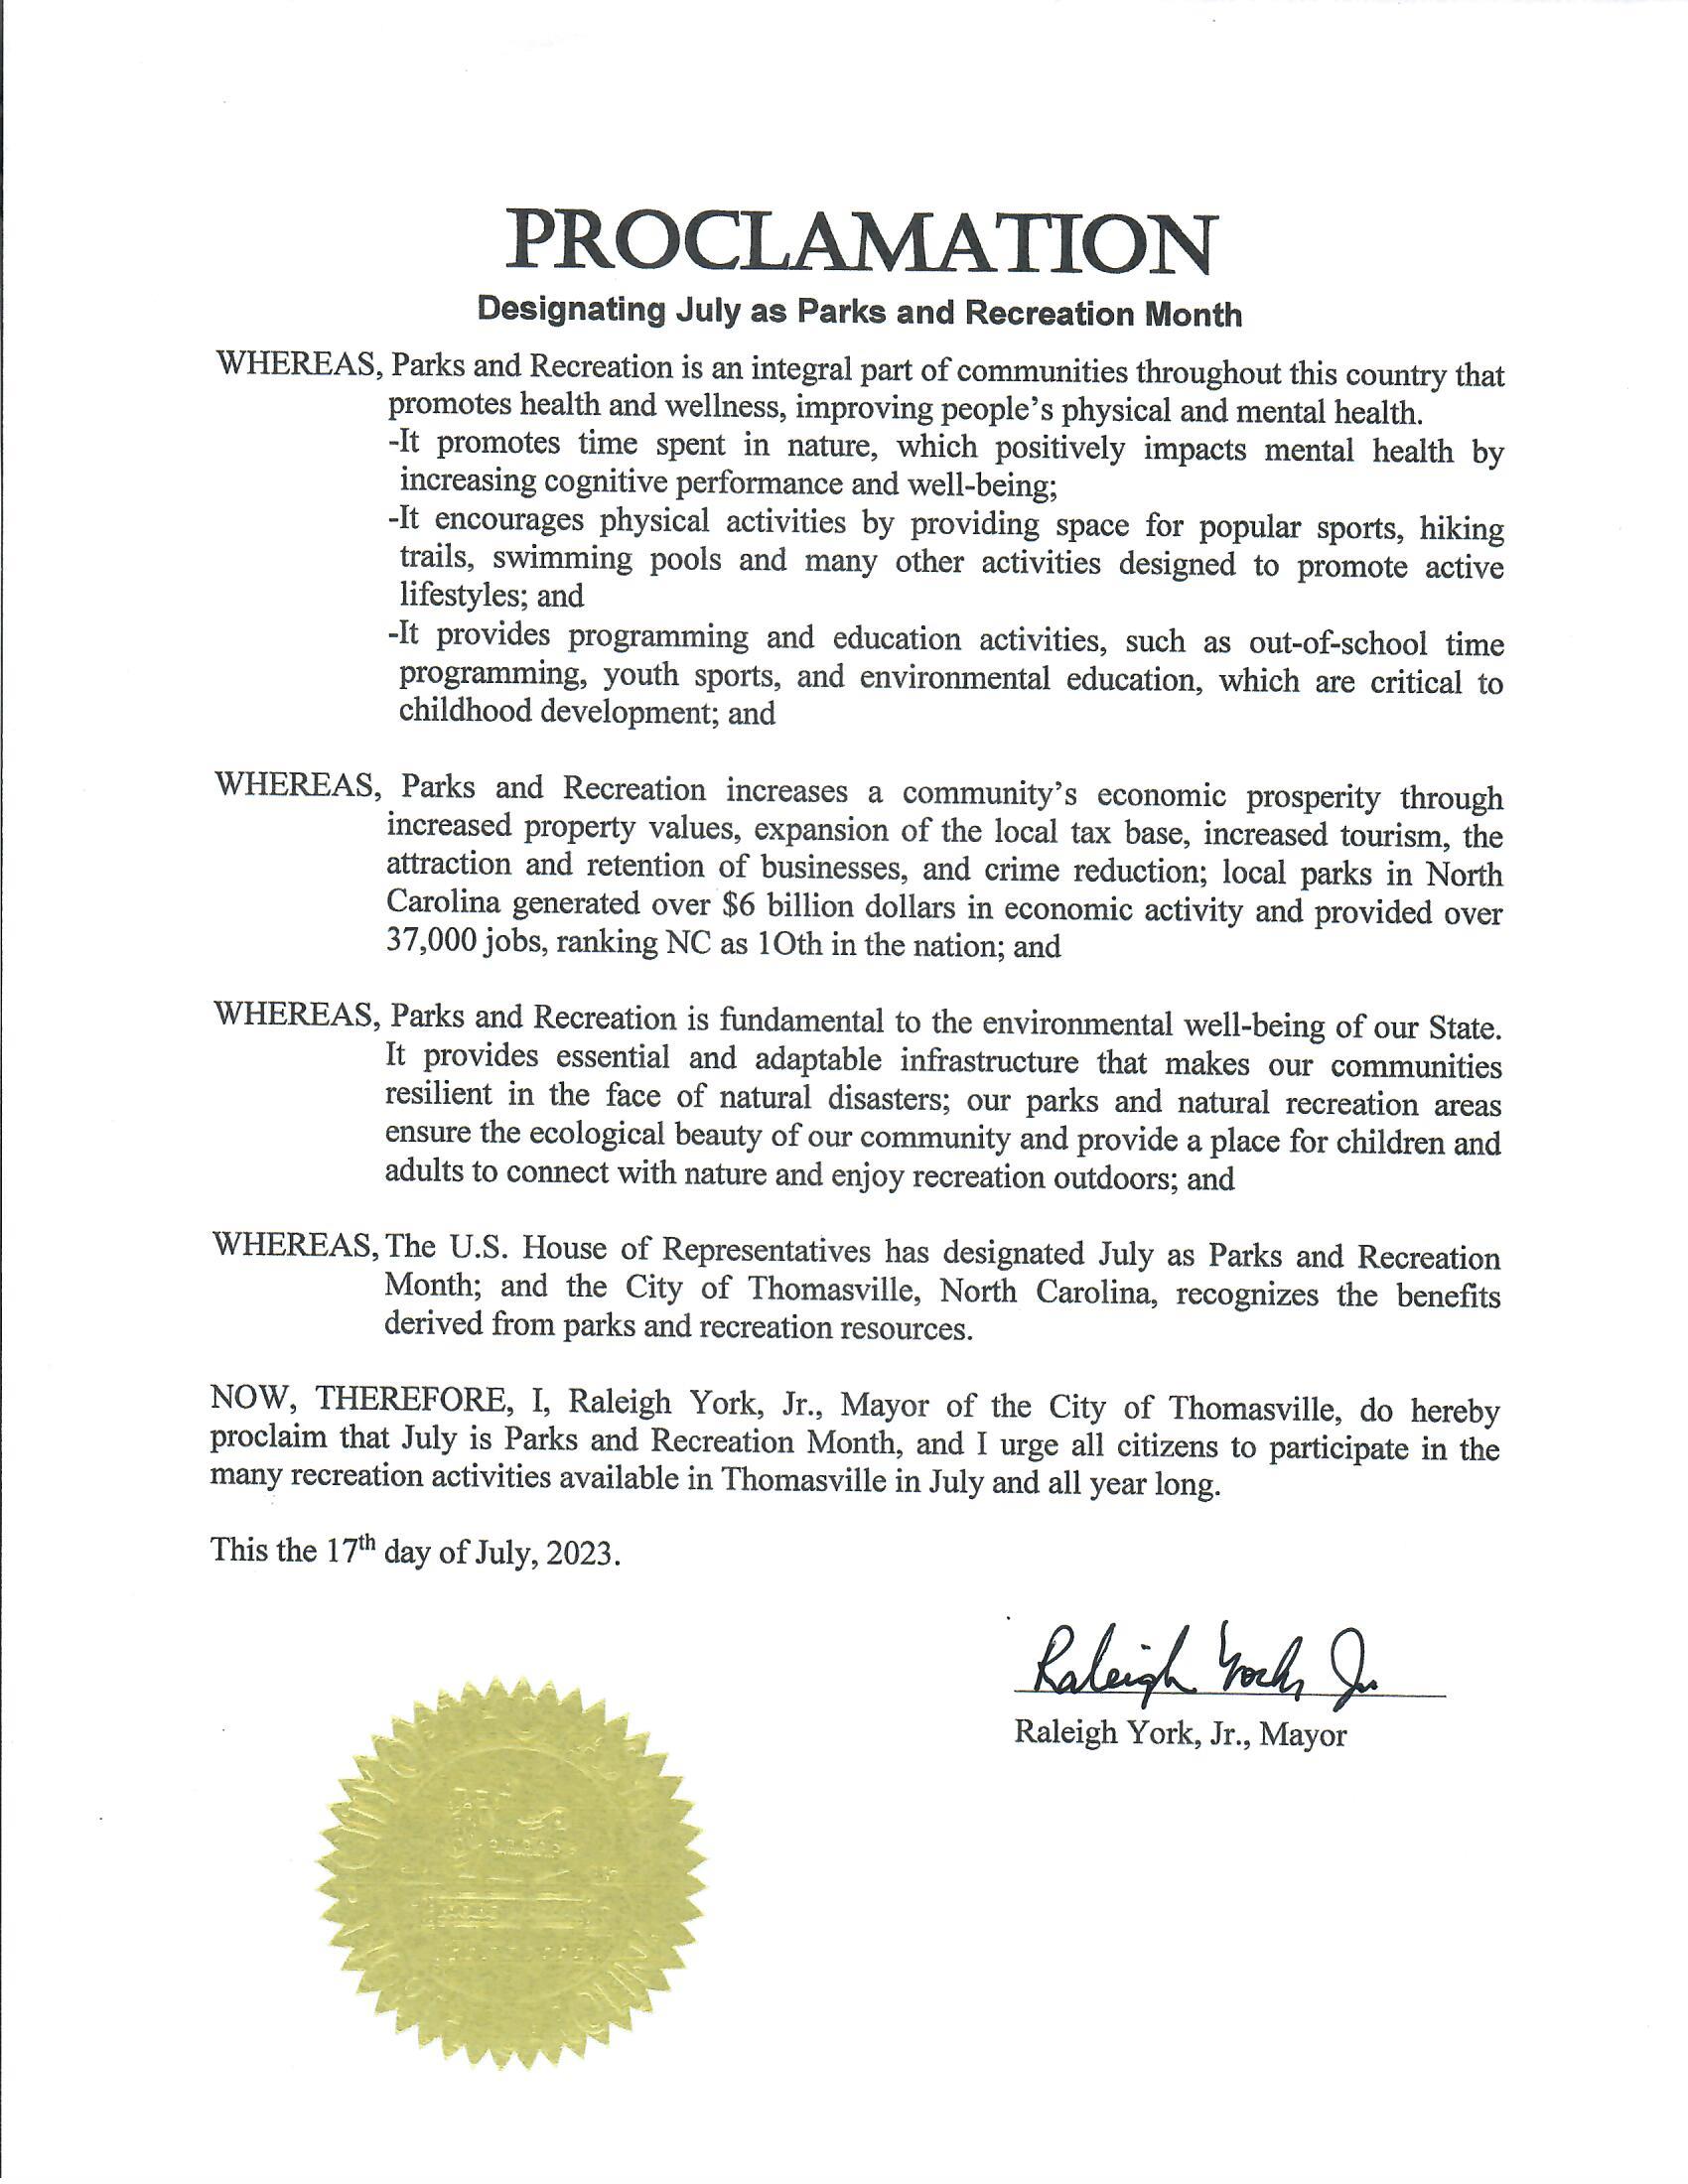 Proclamation - Parks and Rec Month July 2023